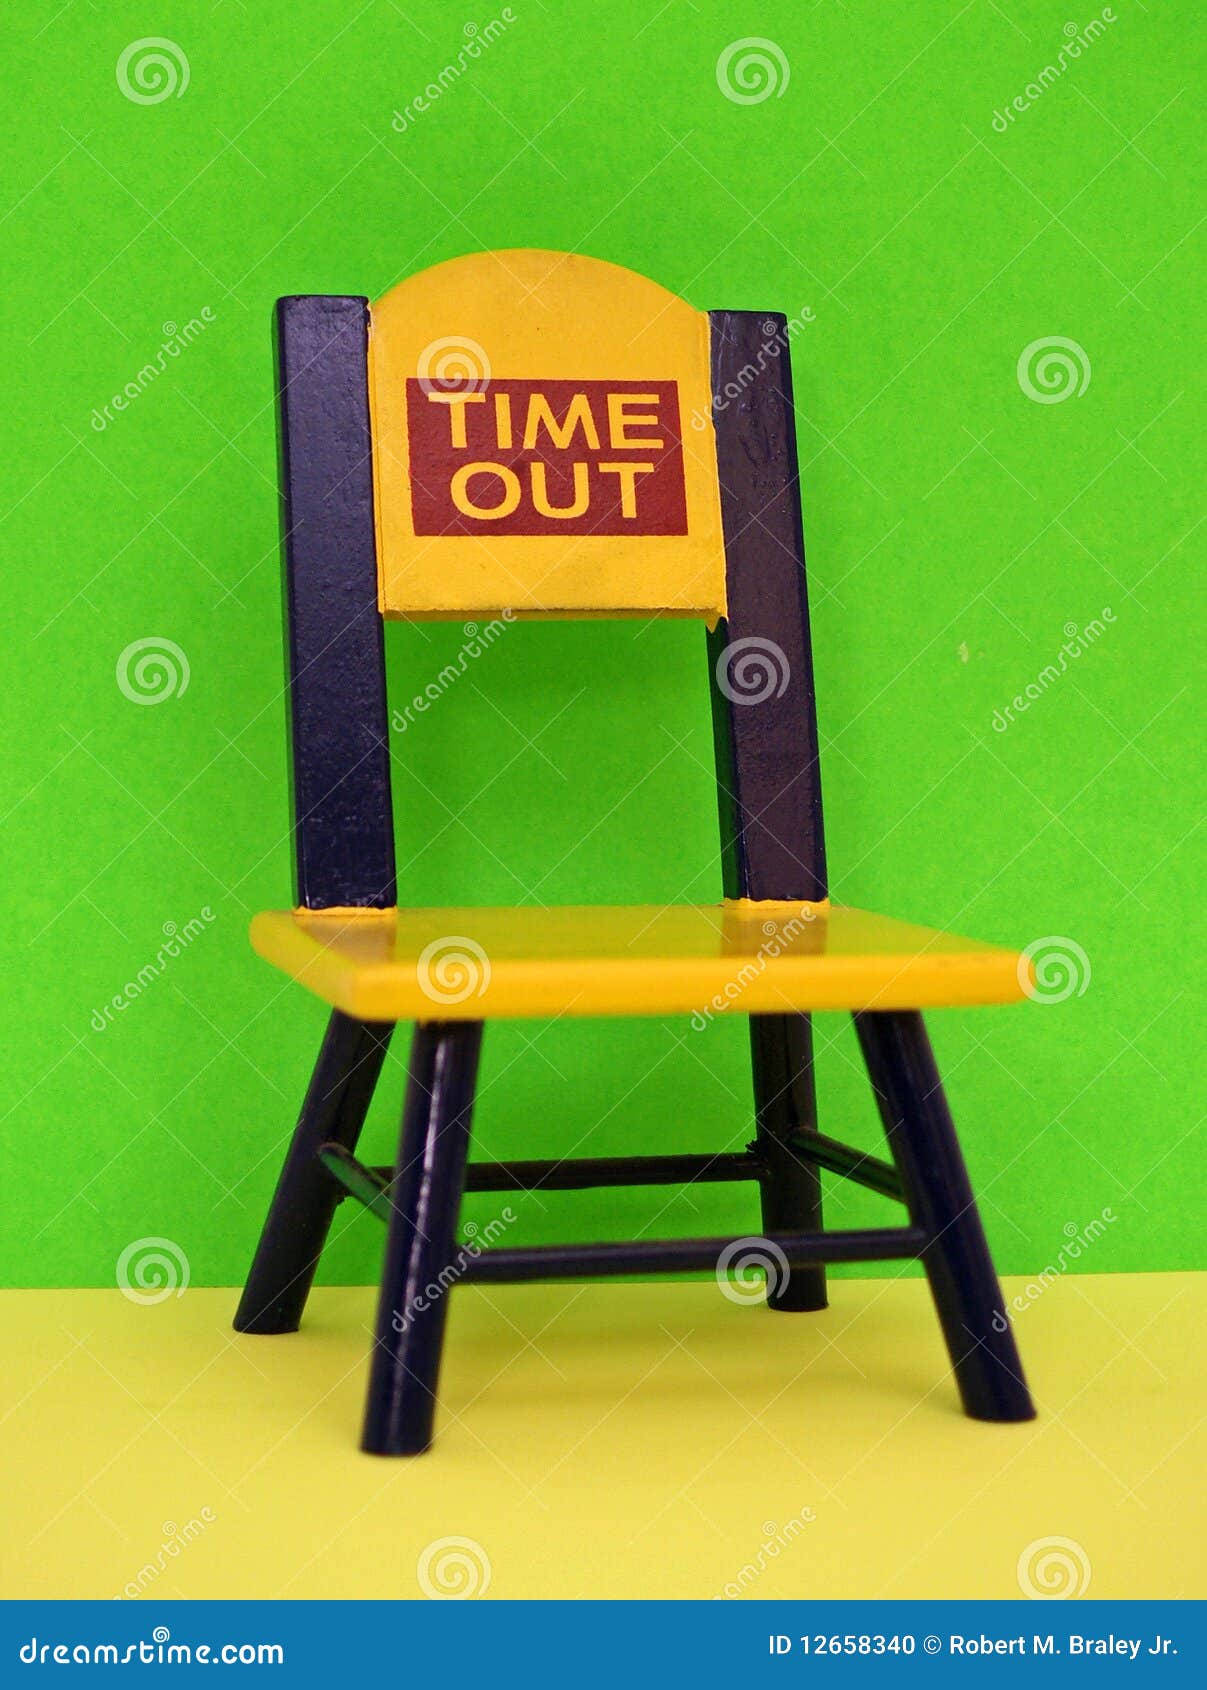 time out chair stock photo image of good discipline  12658340